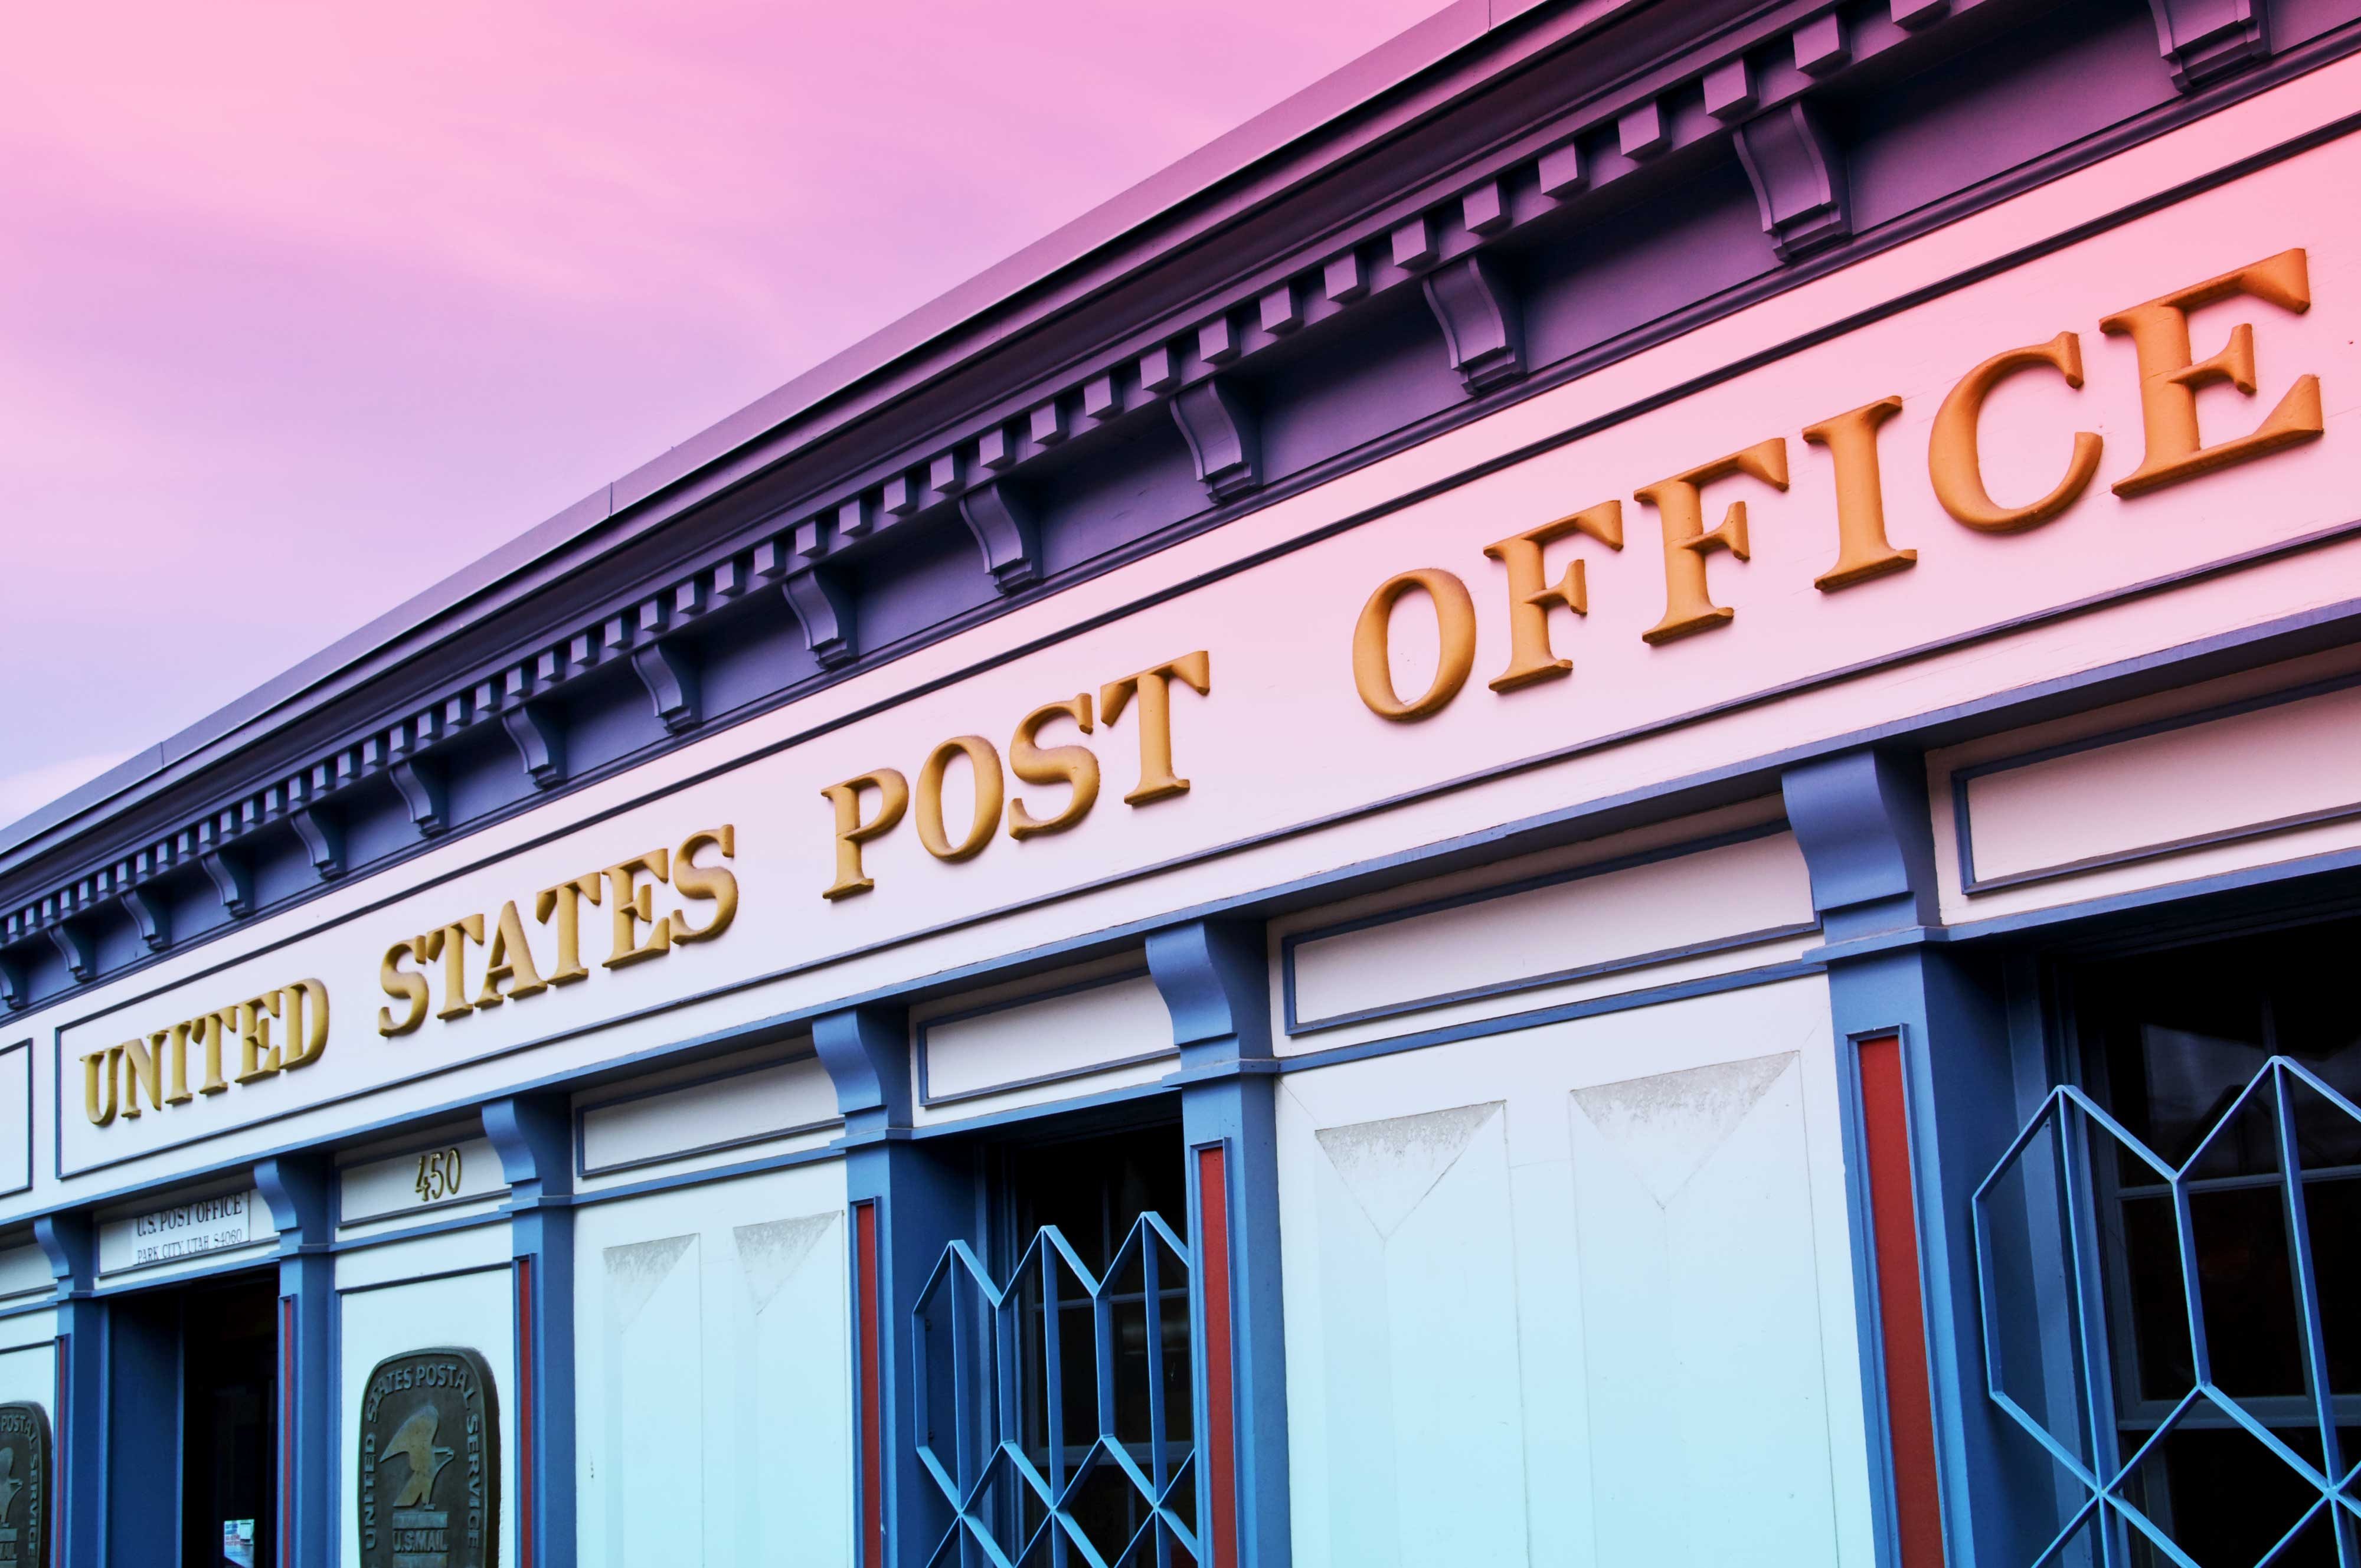 Surprising Facts About the U.S. Postal Service Trusted Since 1922